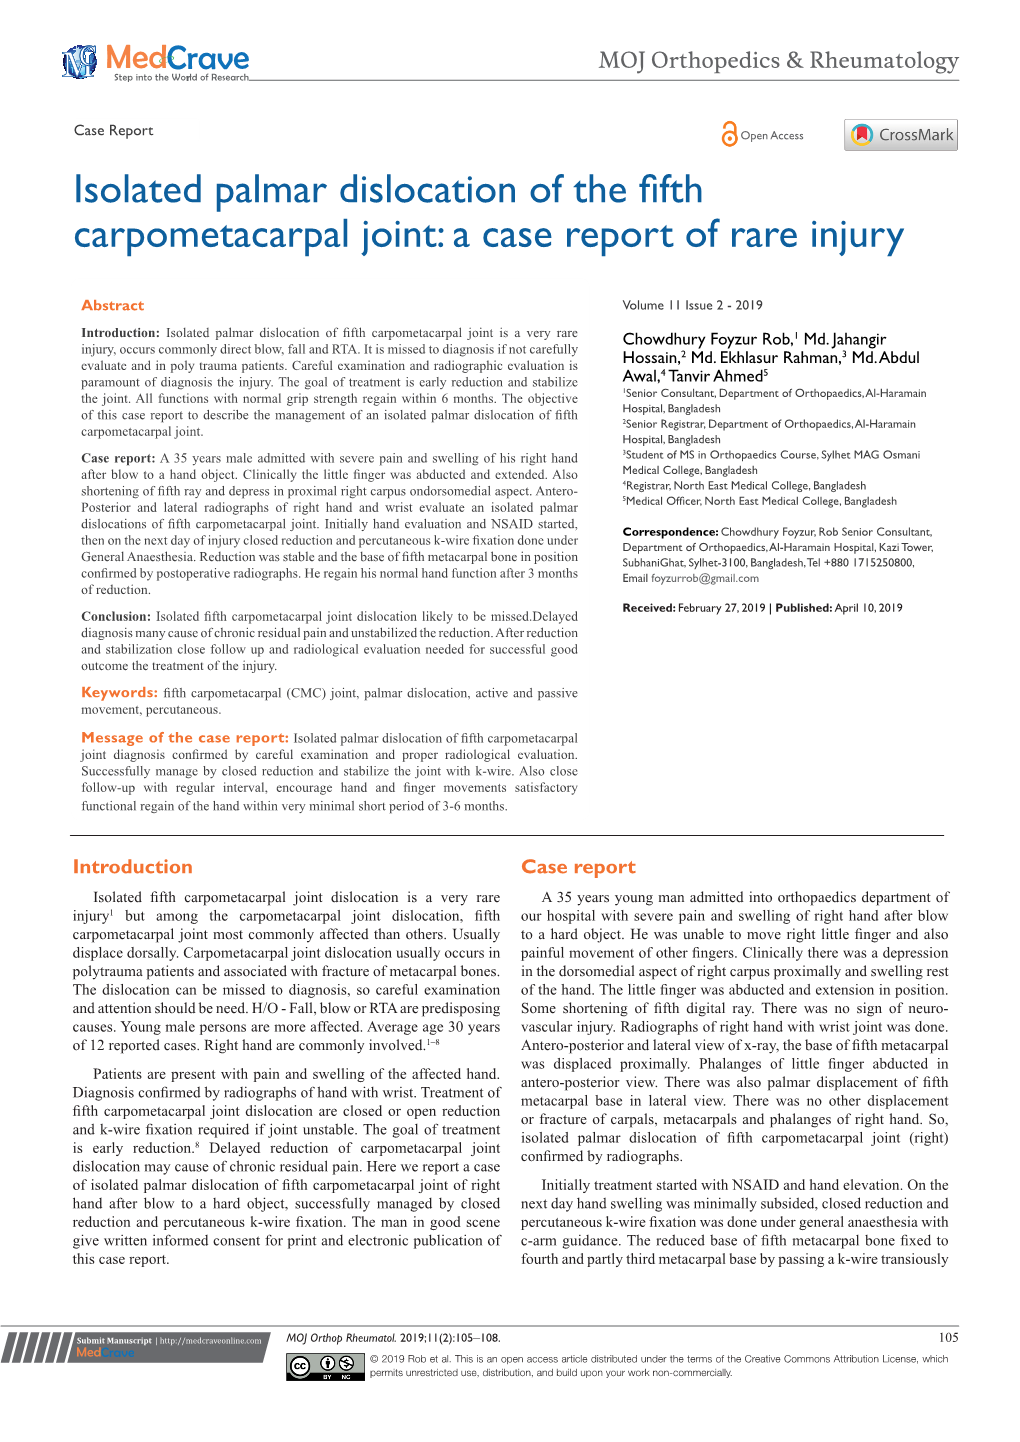 Isolated Palmar Dislocation of the Fifth Carpometacarpal Joint: a Case Report of Rare Injury